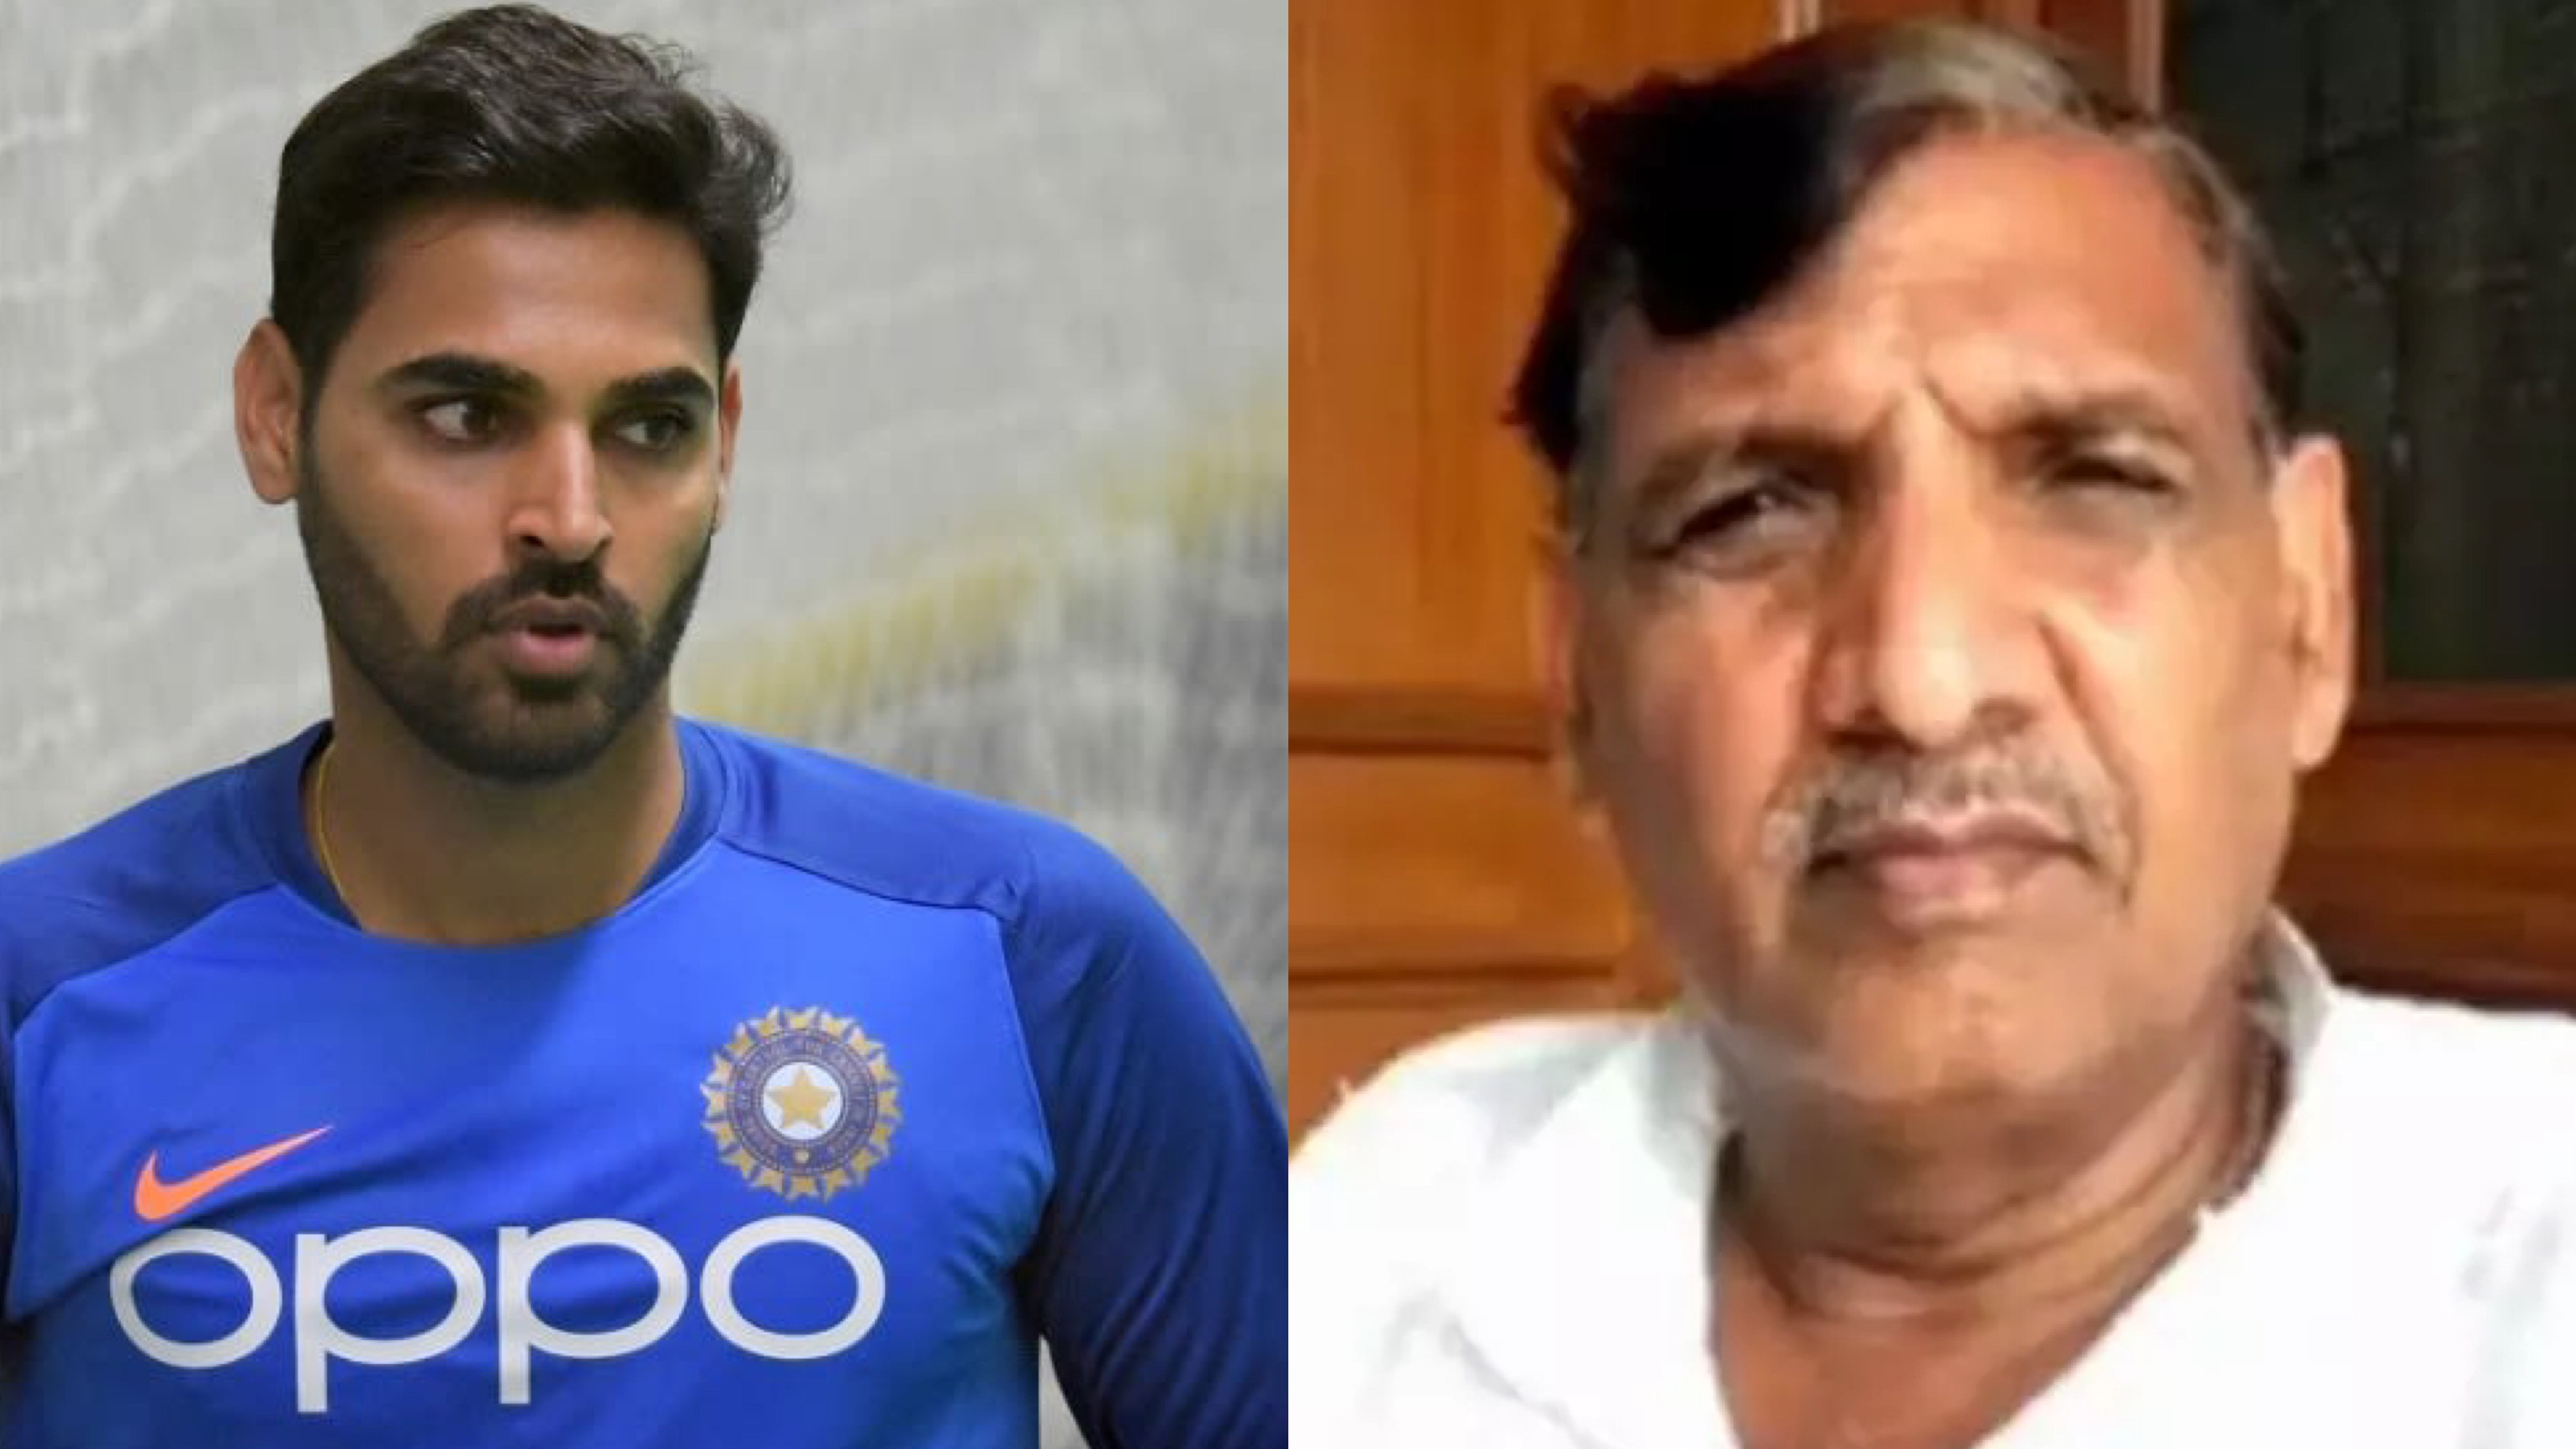 Bhuvneshwar Kumar's father passes away aged 63 due to cancer